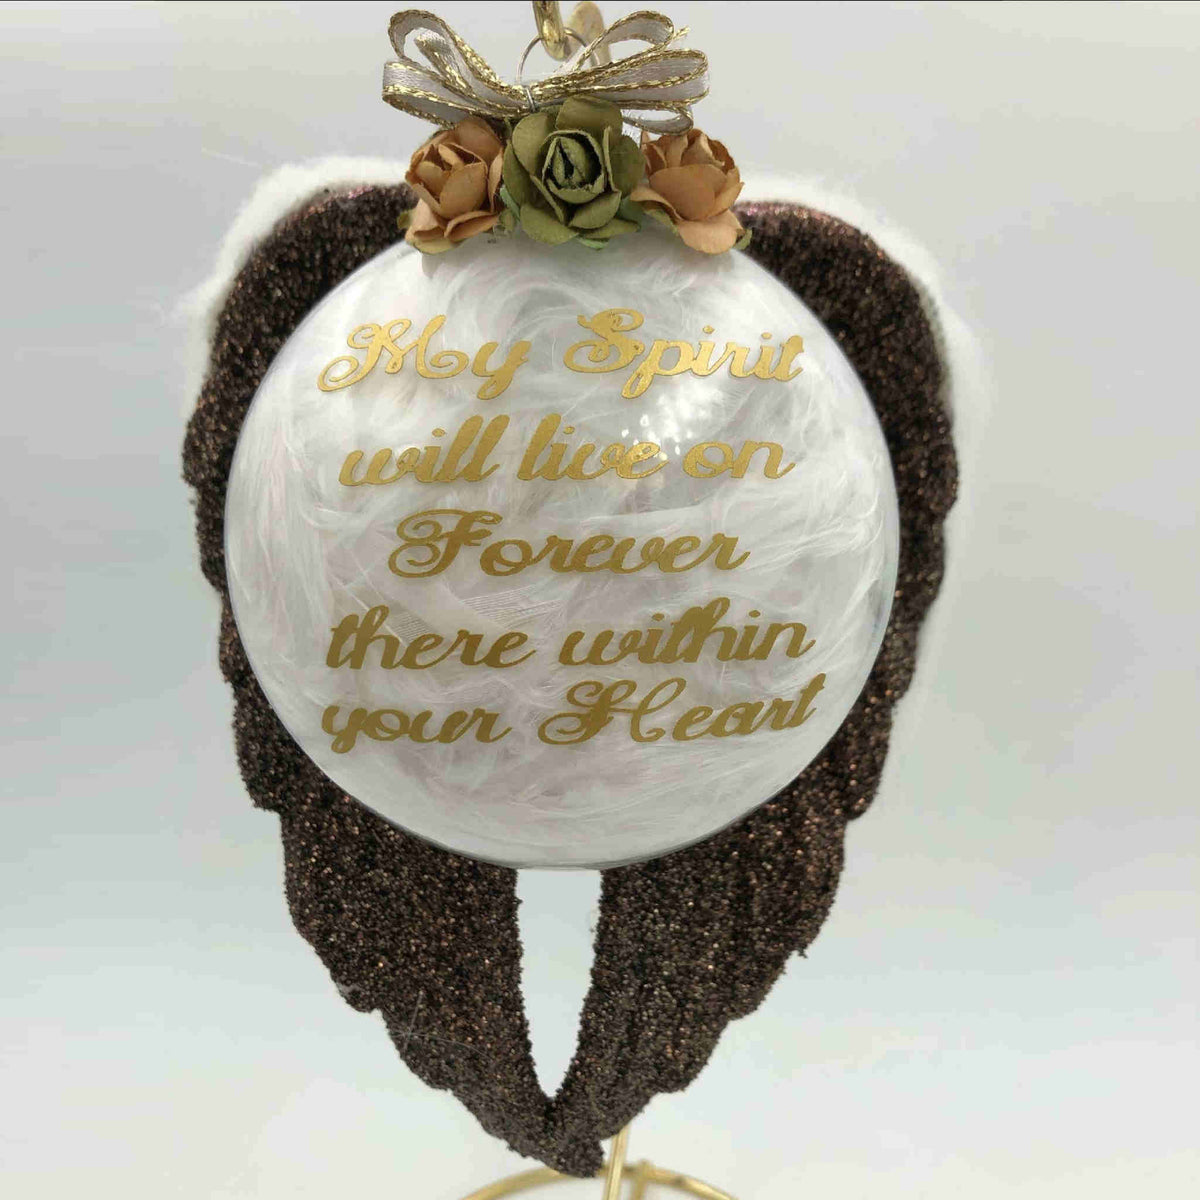 These acrylic ornaments are made in a variety of colors with custom verses, and adorned with glitter, feathers, fur, charms, flowers, or other decorative elements dependent on your selection.